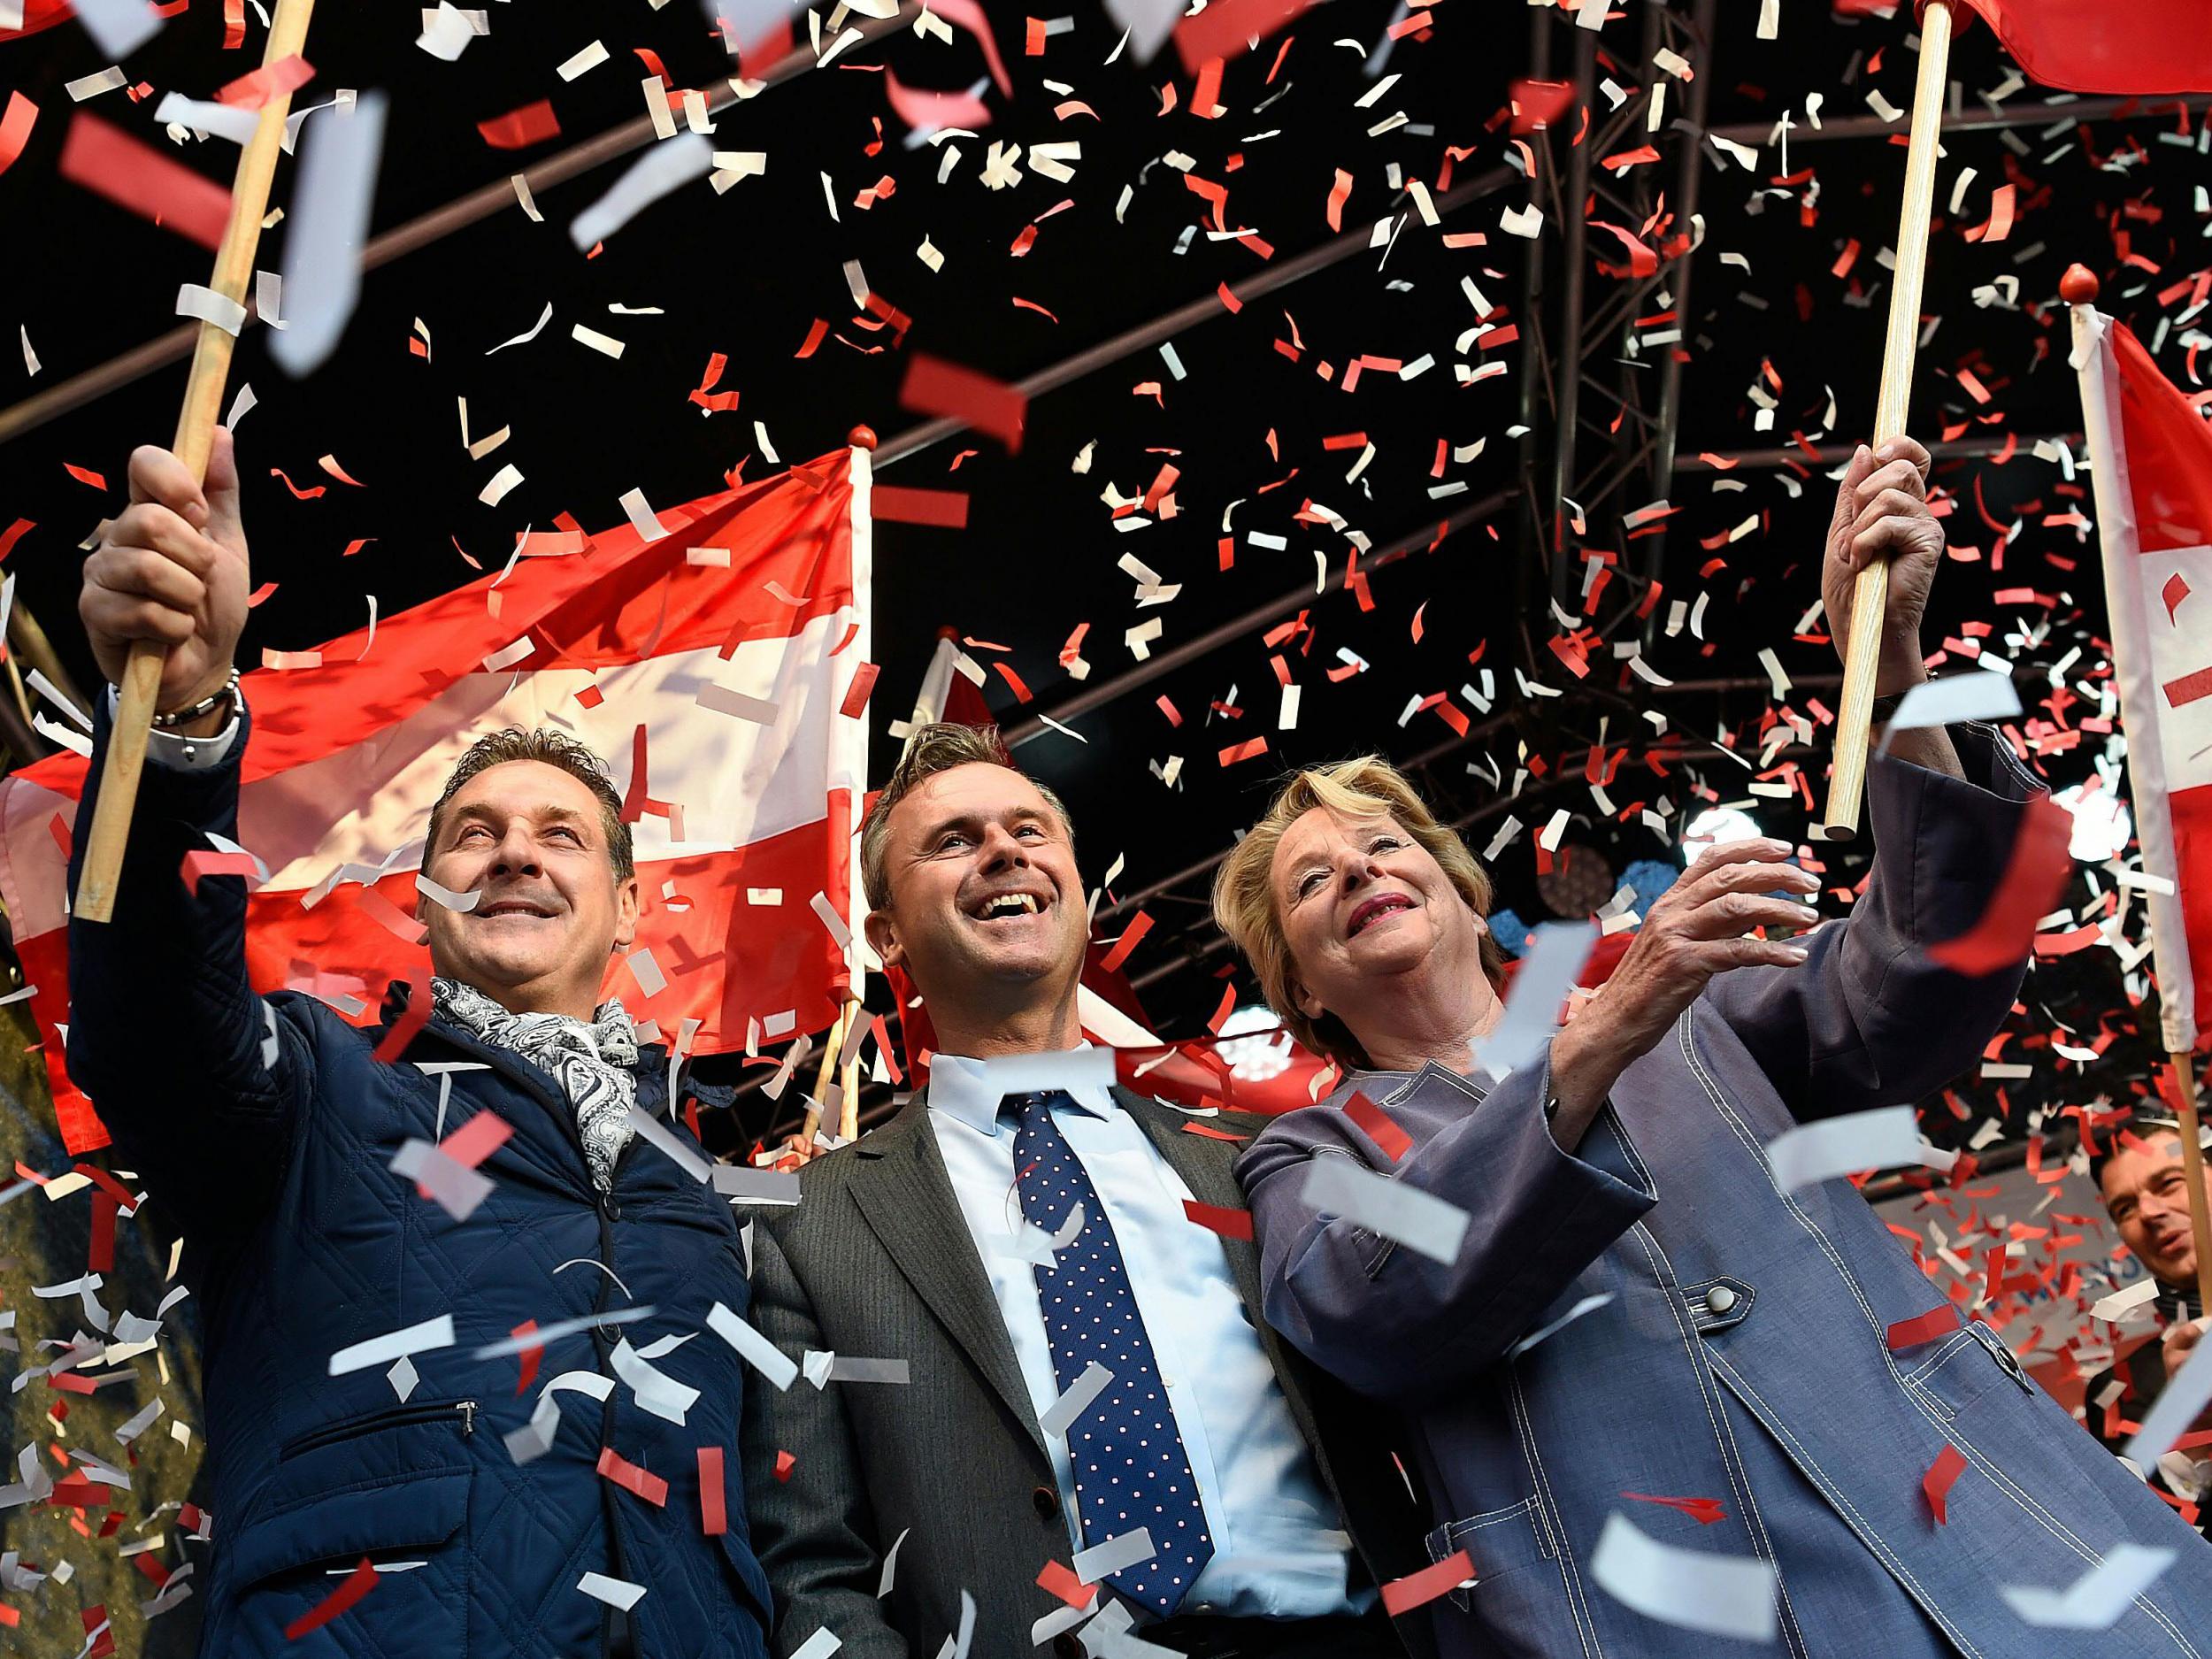 Right-wing Austrian Freedom Party presidential candidate Norbert Hofer at a rally in May